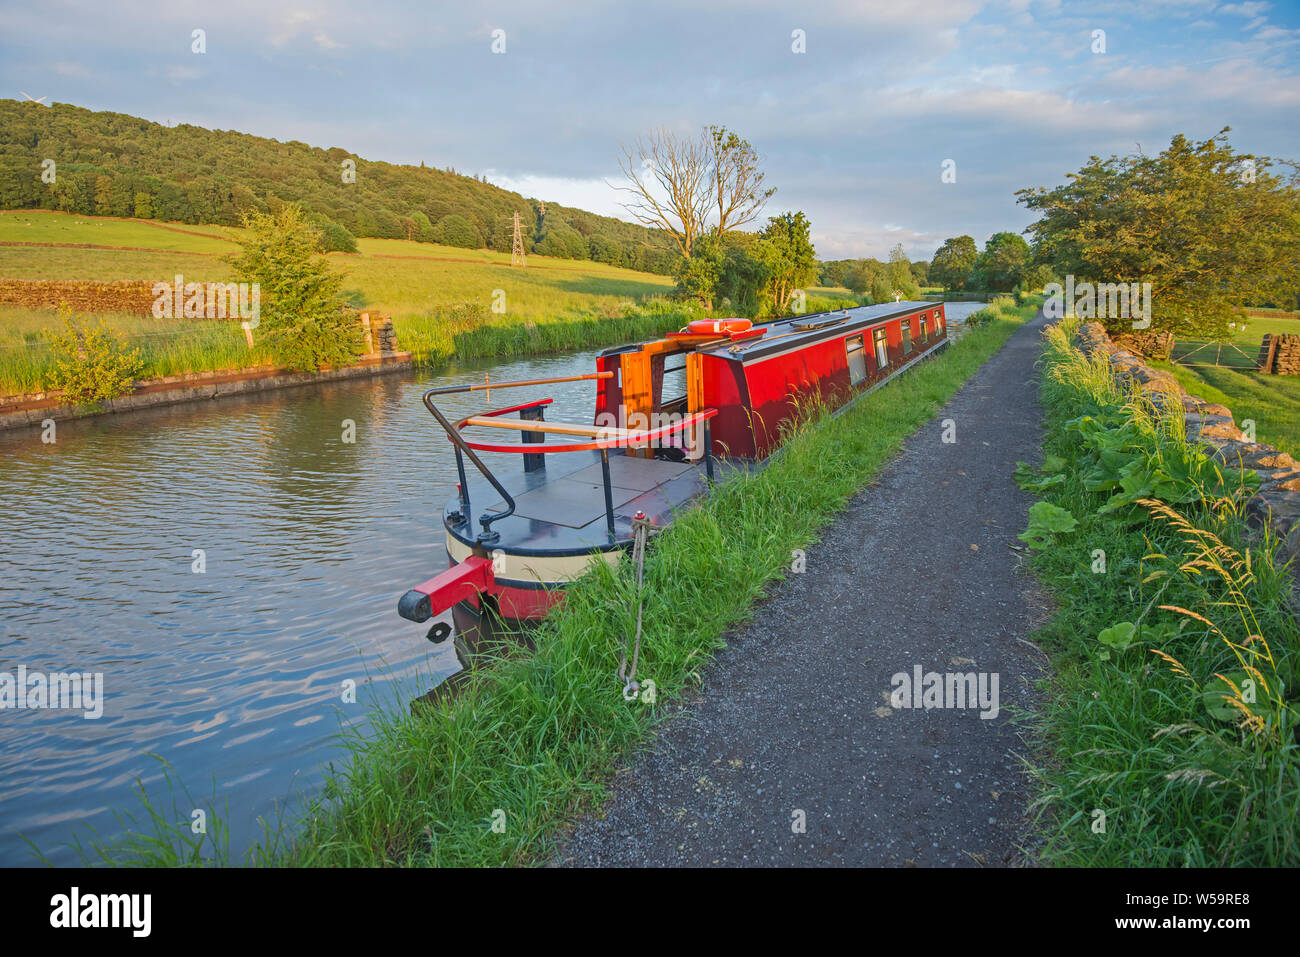 Narrowboat moored up in English rural countryside scenery on British waterway canal Stock Photo